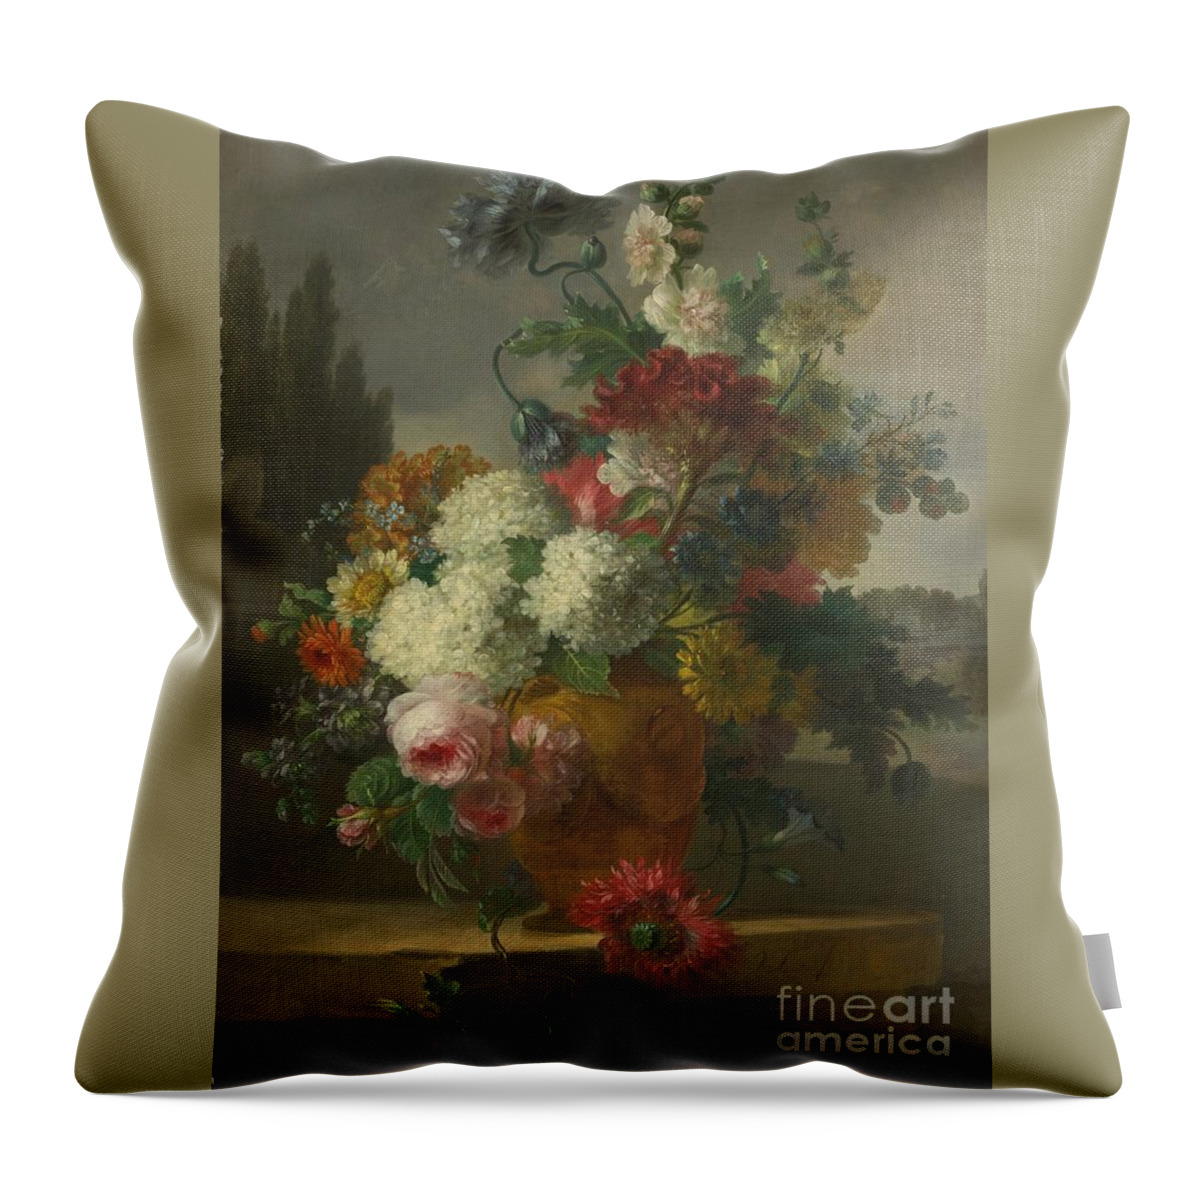 Willem Van Leen Dordrecht 1753 - 1825 Delfshaven Still Life Of Flowers In A Vase Resting On A Stone Ledge. Beautiful Flowers Throw Pillow featuring the painting Delfshaven Still Life Of Flowers In A Vase by MotionAge Designs